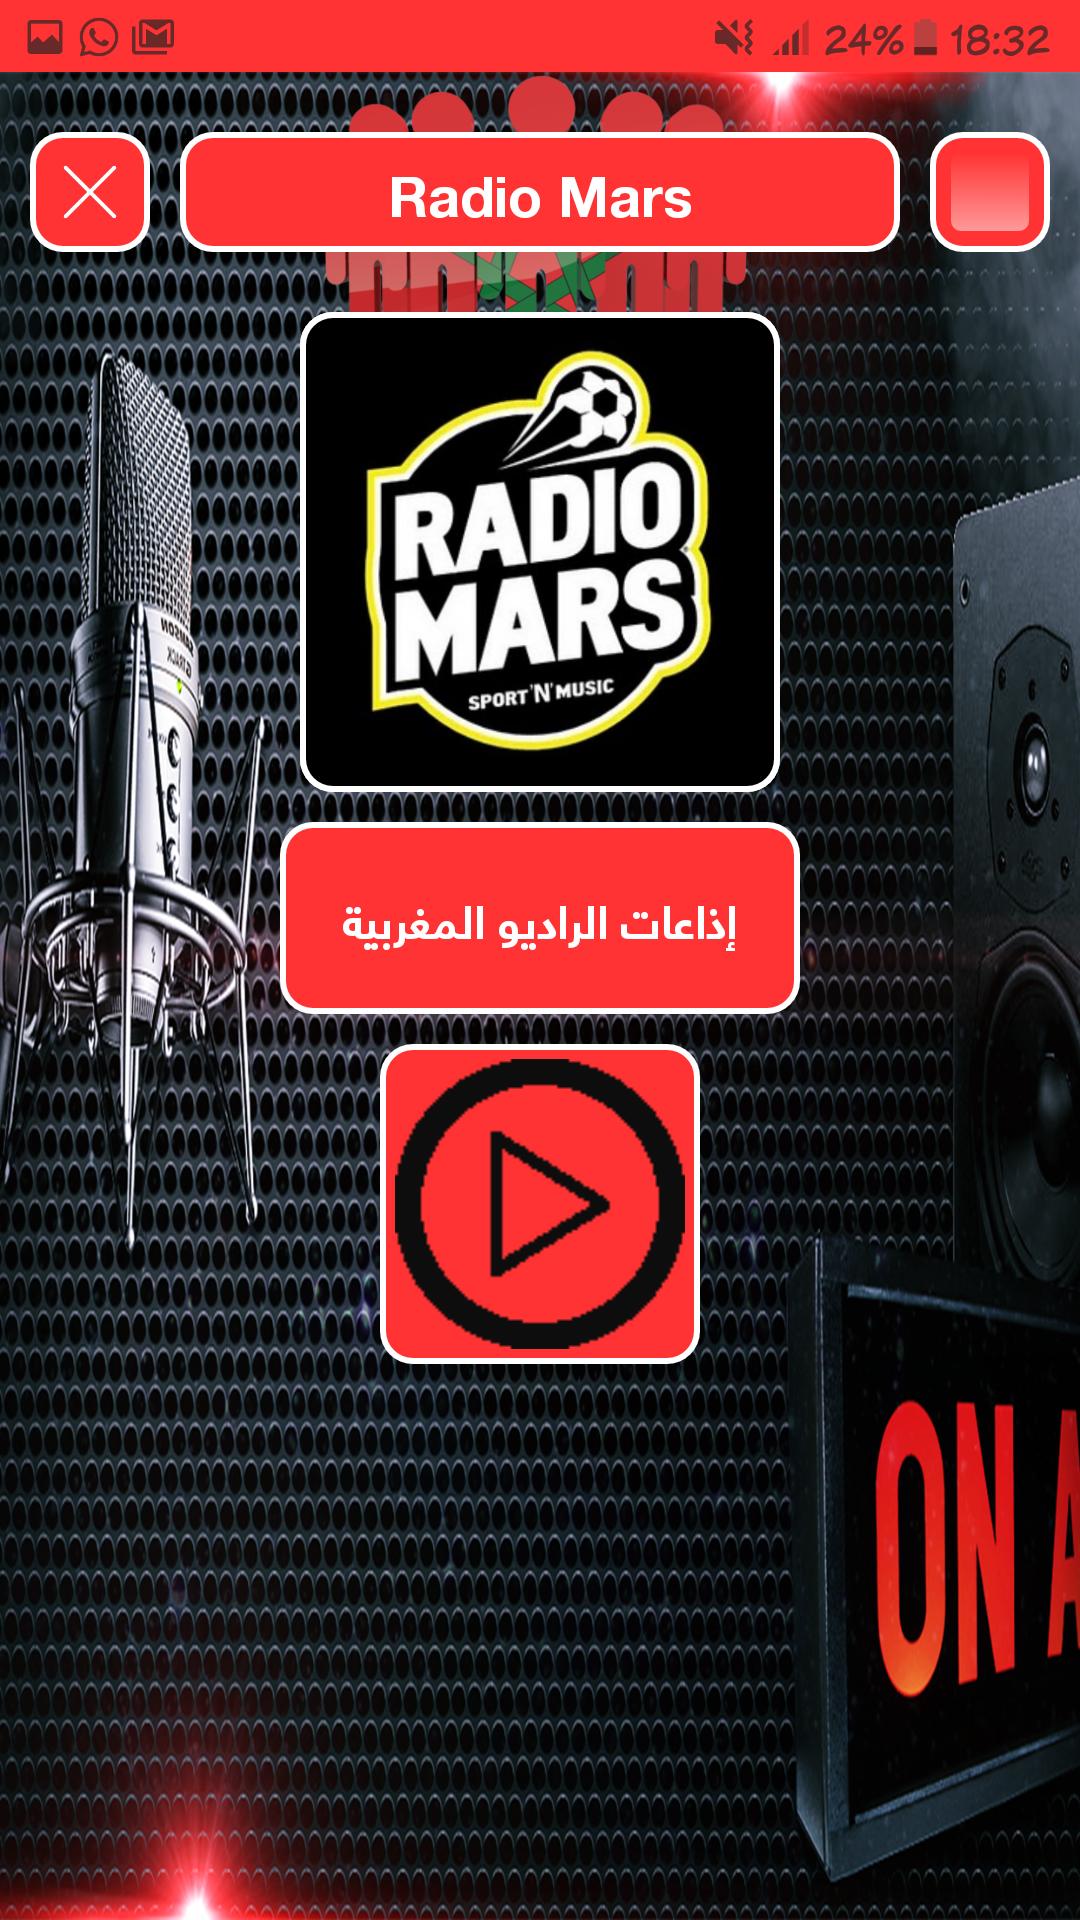 Radio Maroc Online for Android - APK Download